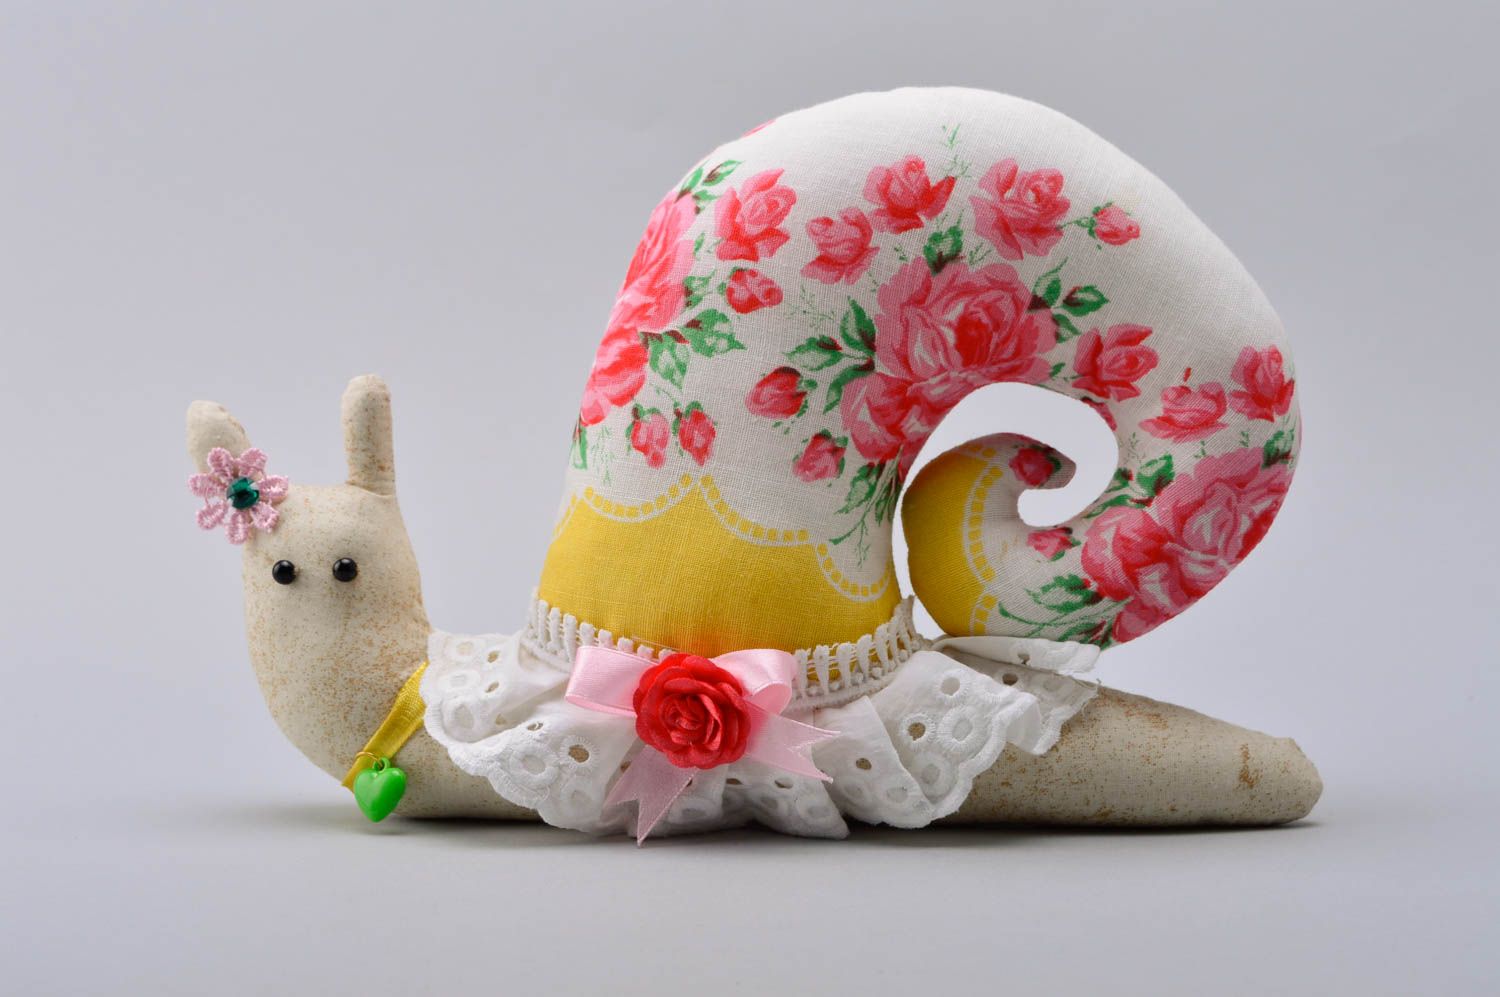 Soft toy handmade toy animal snail toy birthday gifts for kids home decor photo 4